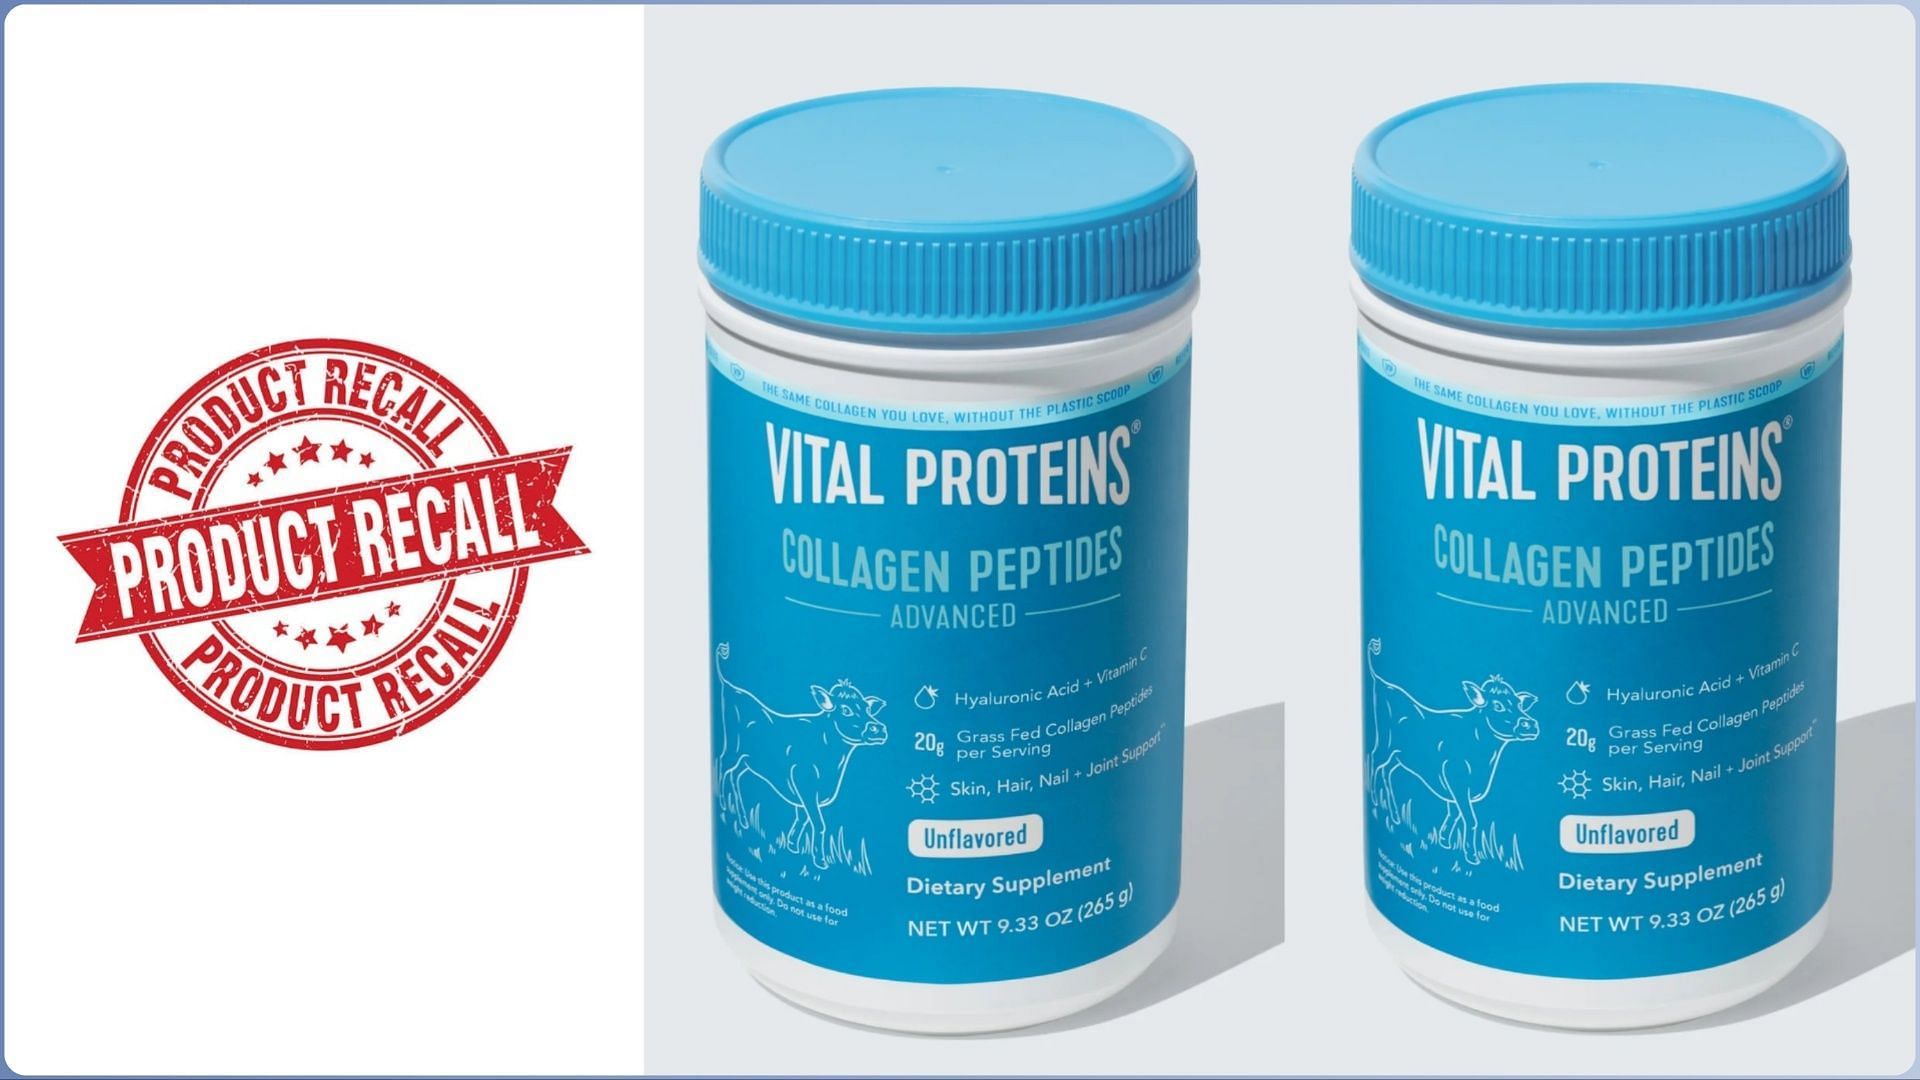 Vital Proteins recalls Vital Proteins Collagen Peptides over contamination with foreign particles (Image via Vital Proteins)